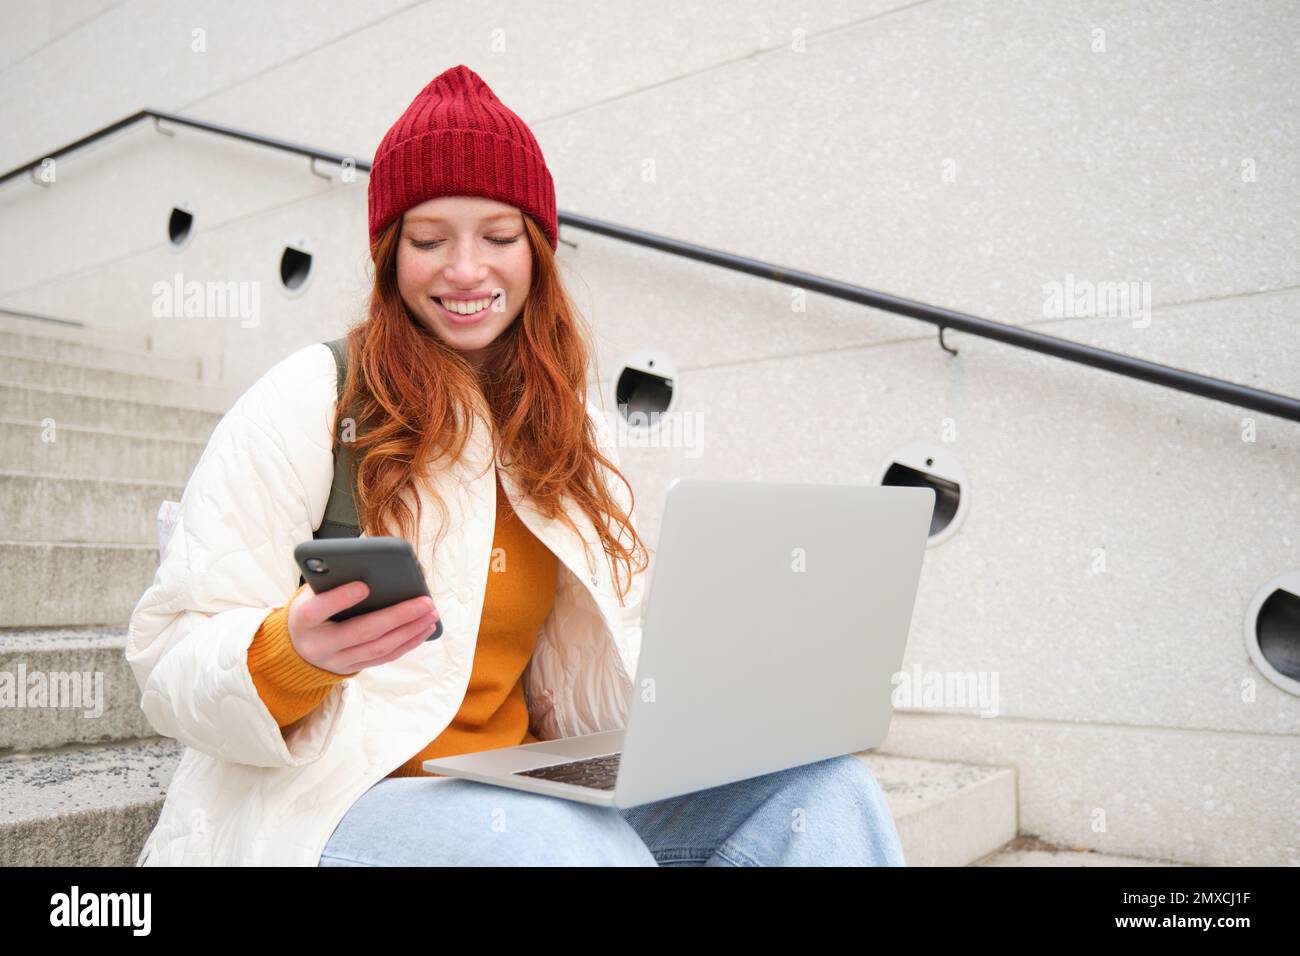 Young tourist, girl booking hotel room on laptop, enters confirmation code on smartphone, sitting with computer and phone on stairs outdoors. Stock Photo